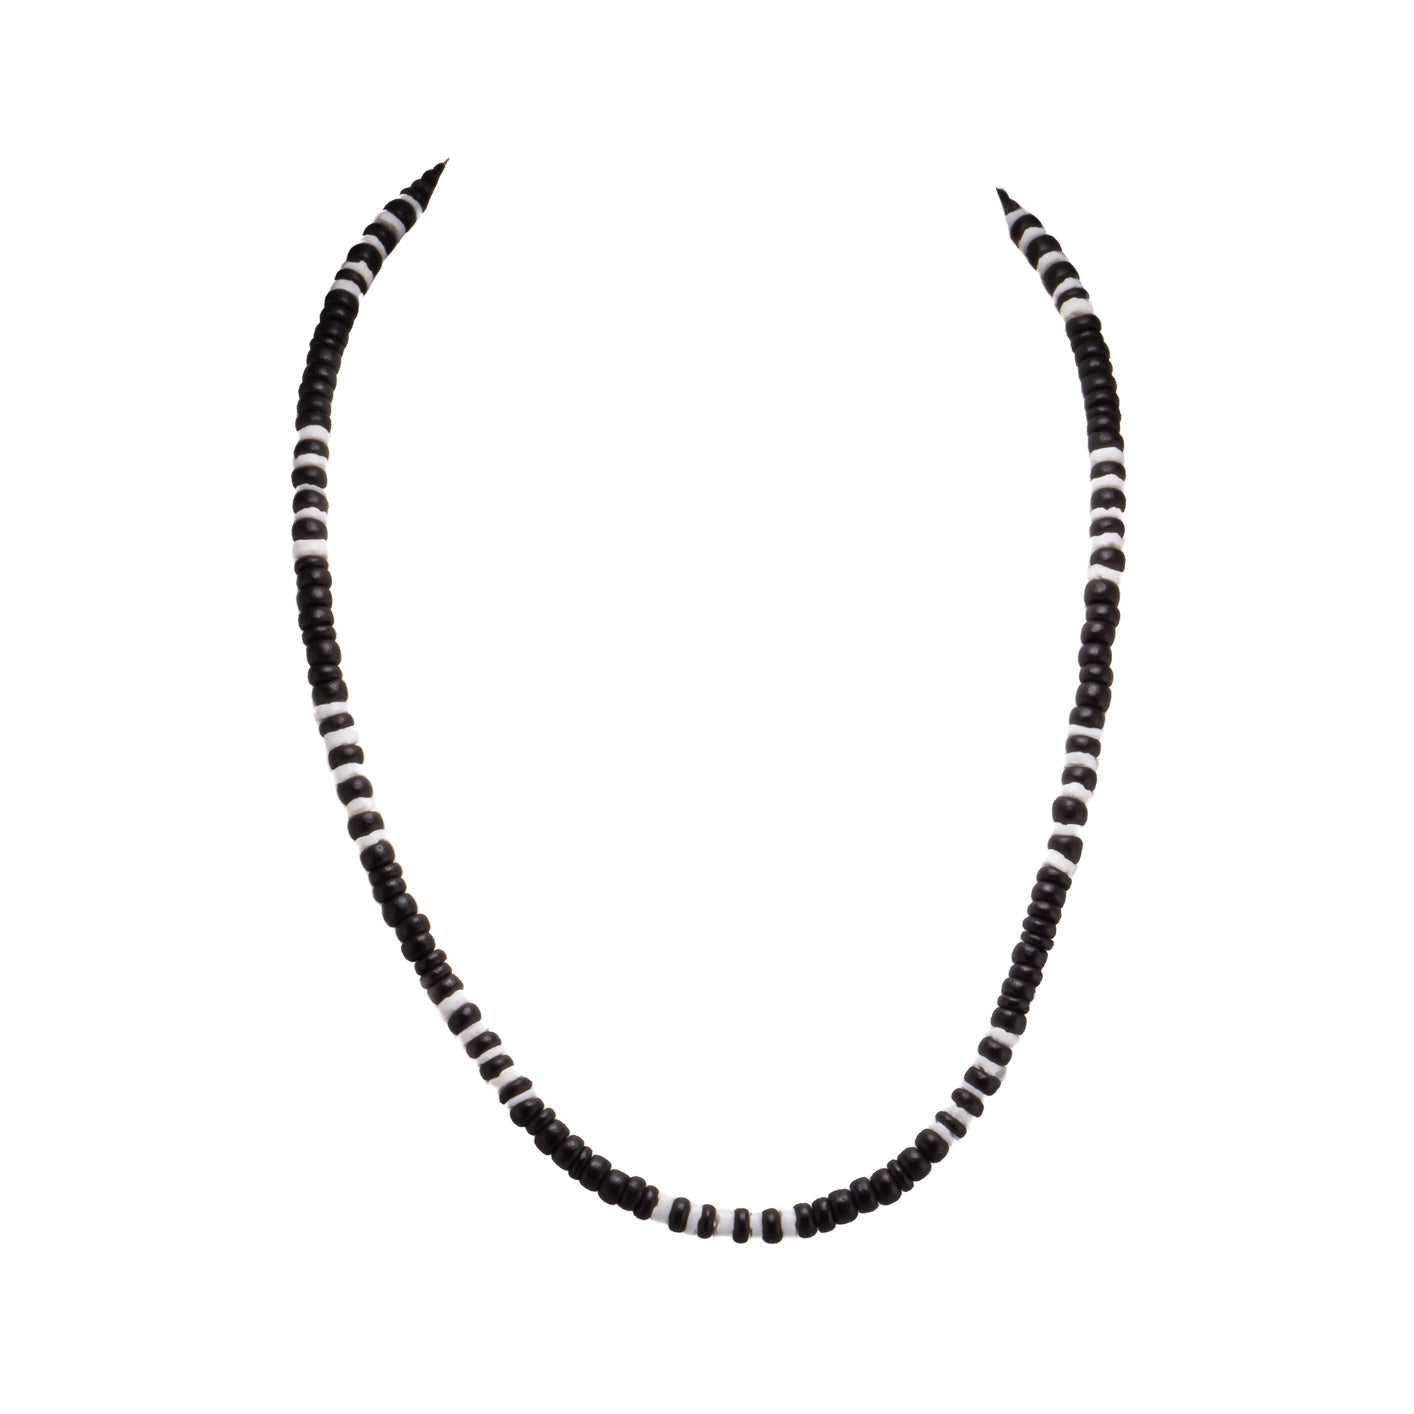 Black Coconut and Puka Shell Beads Necklace